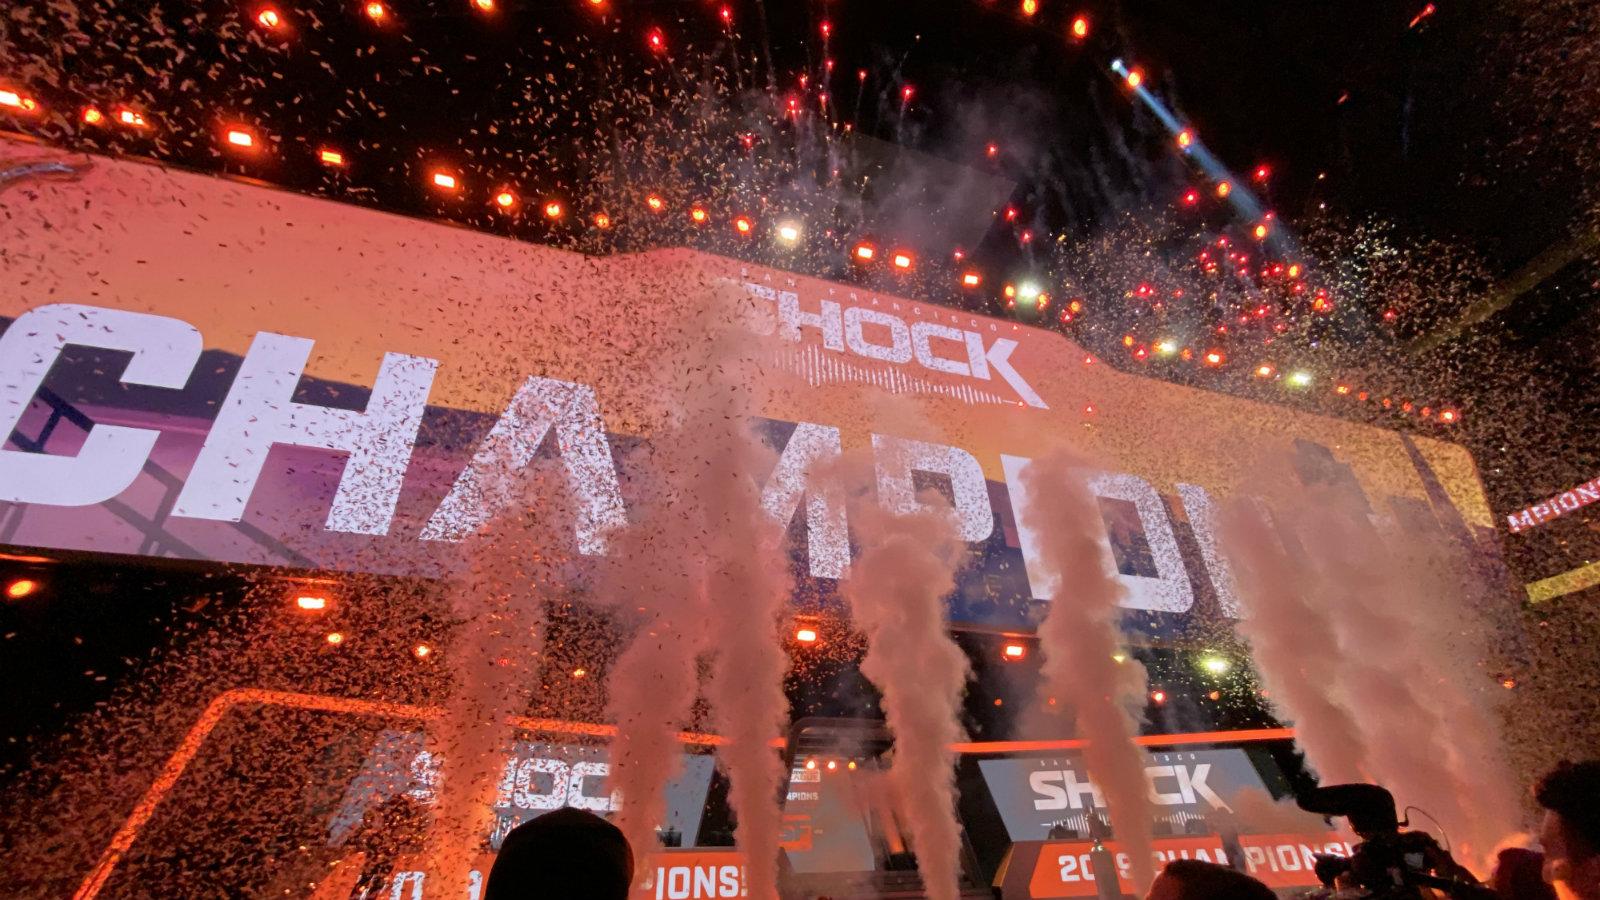 Shock win their first OWL championship